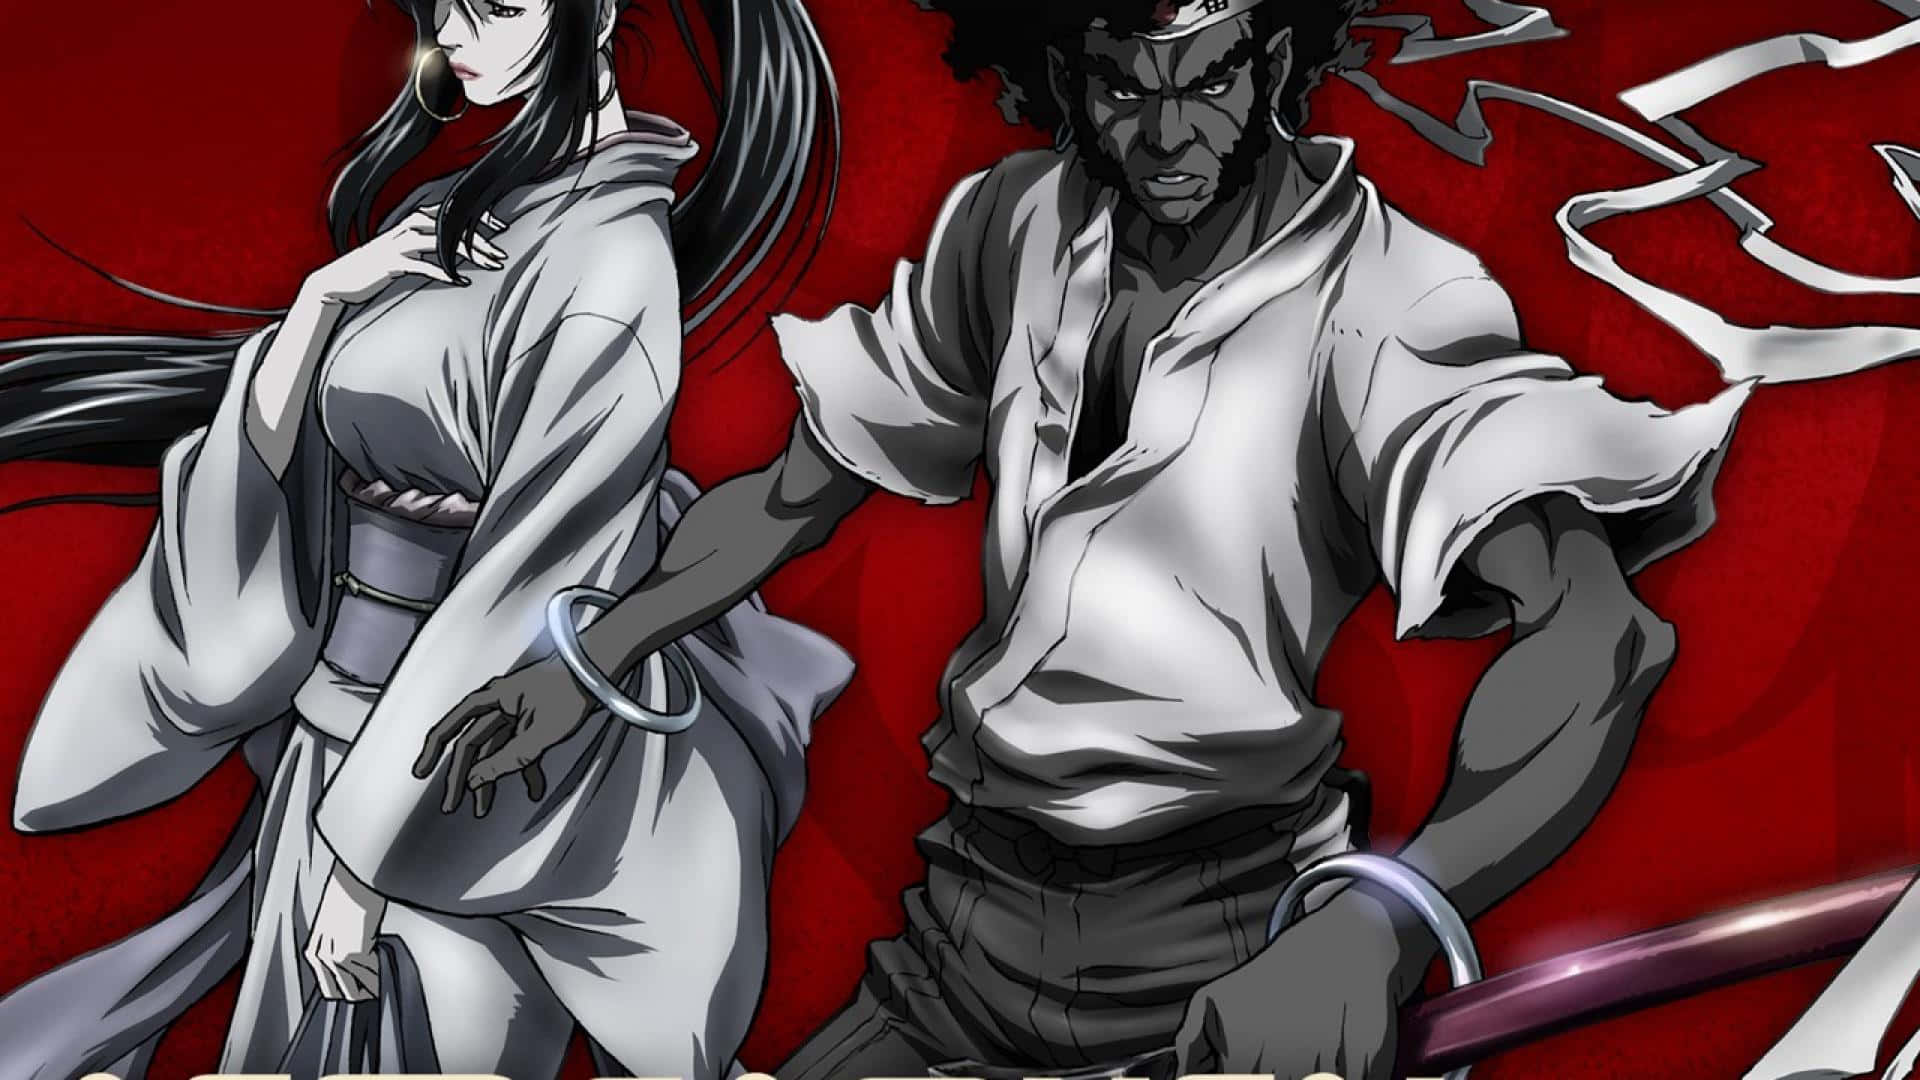 Afro Samurai Anime Fabric Wall Scroll Poster 16 x 20 Inches WPAfro5   Amazonca Home